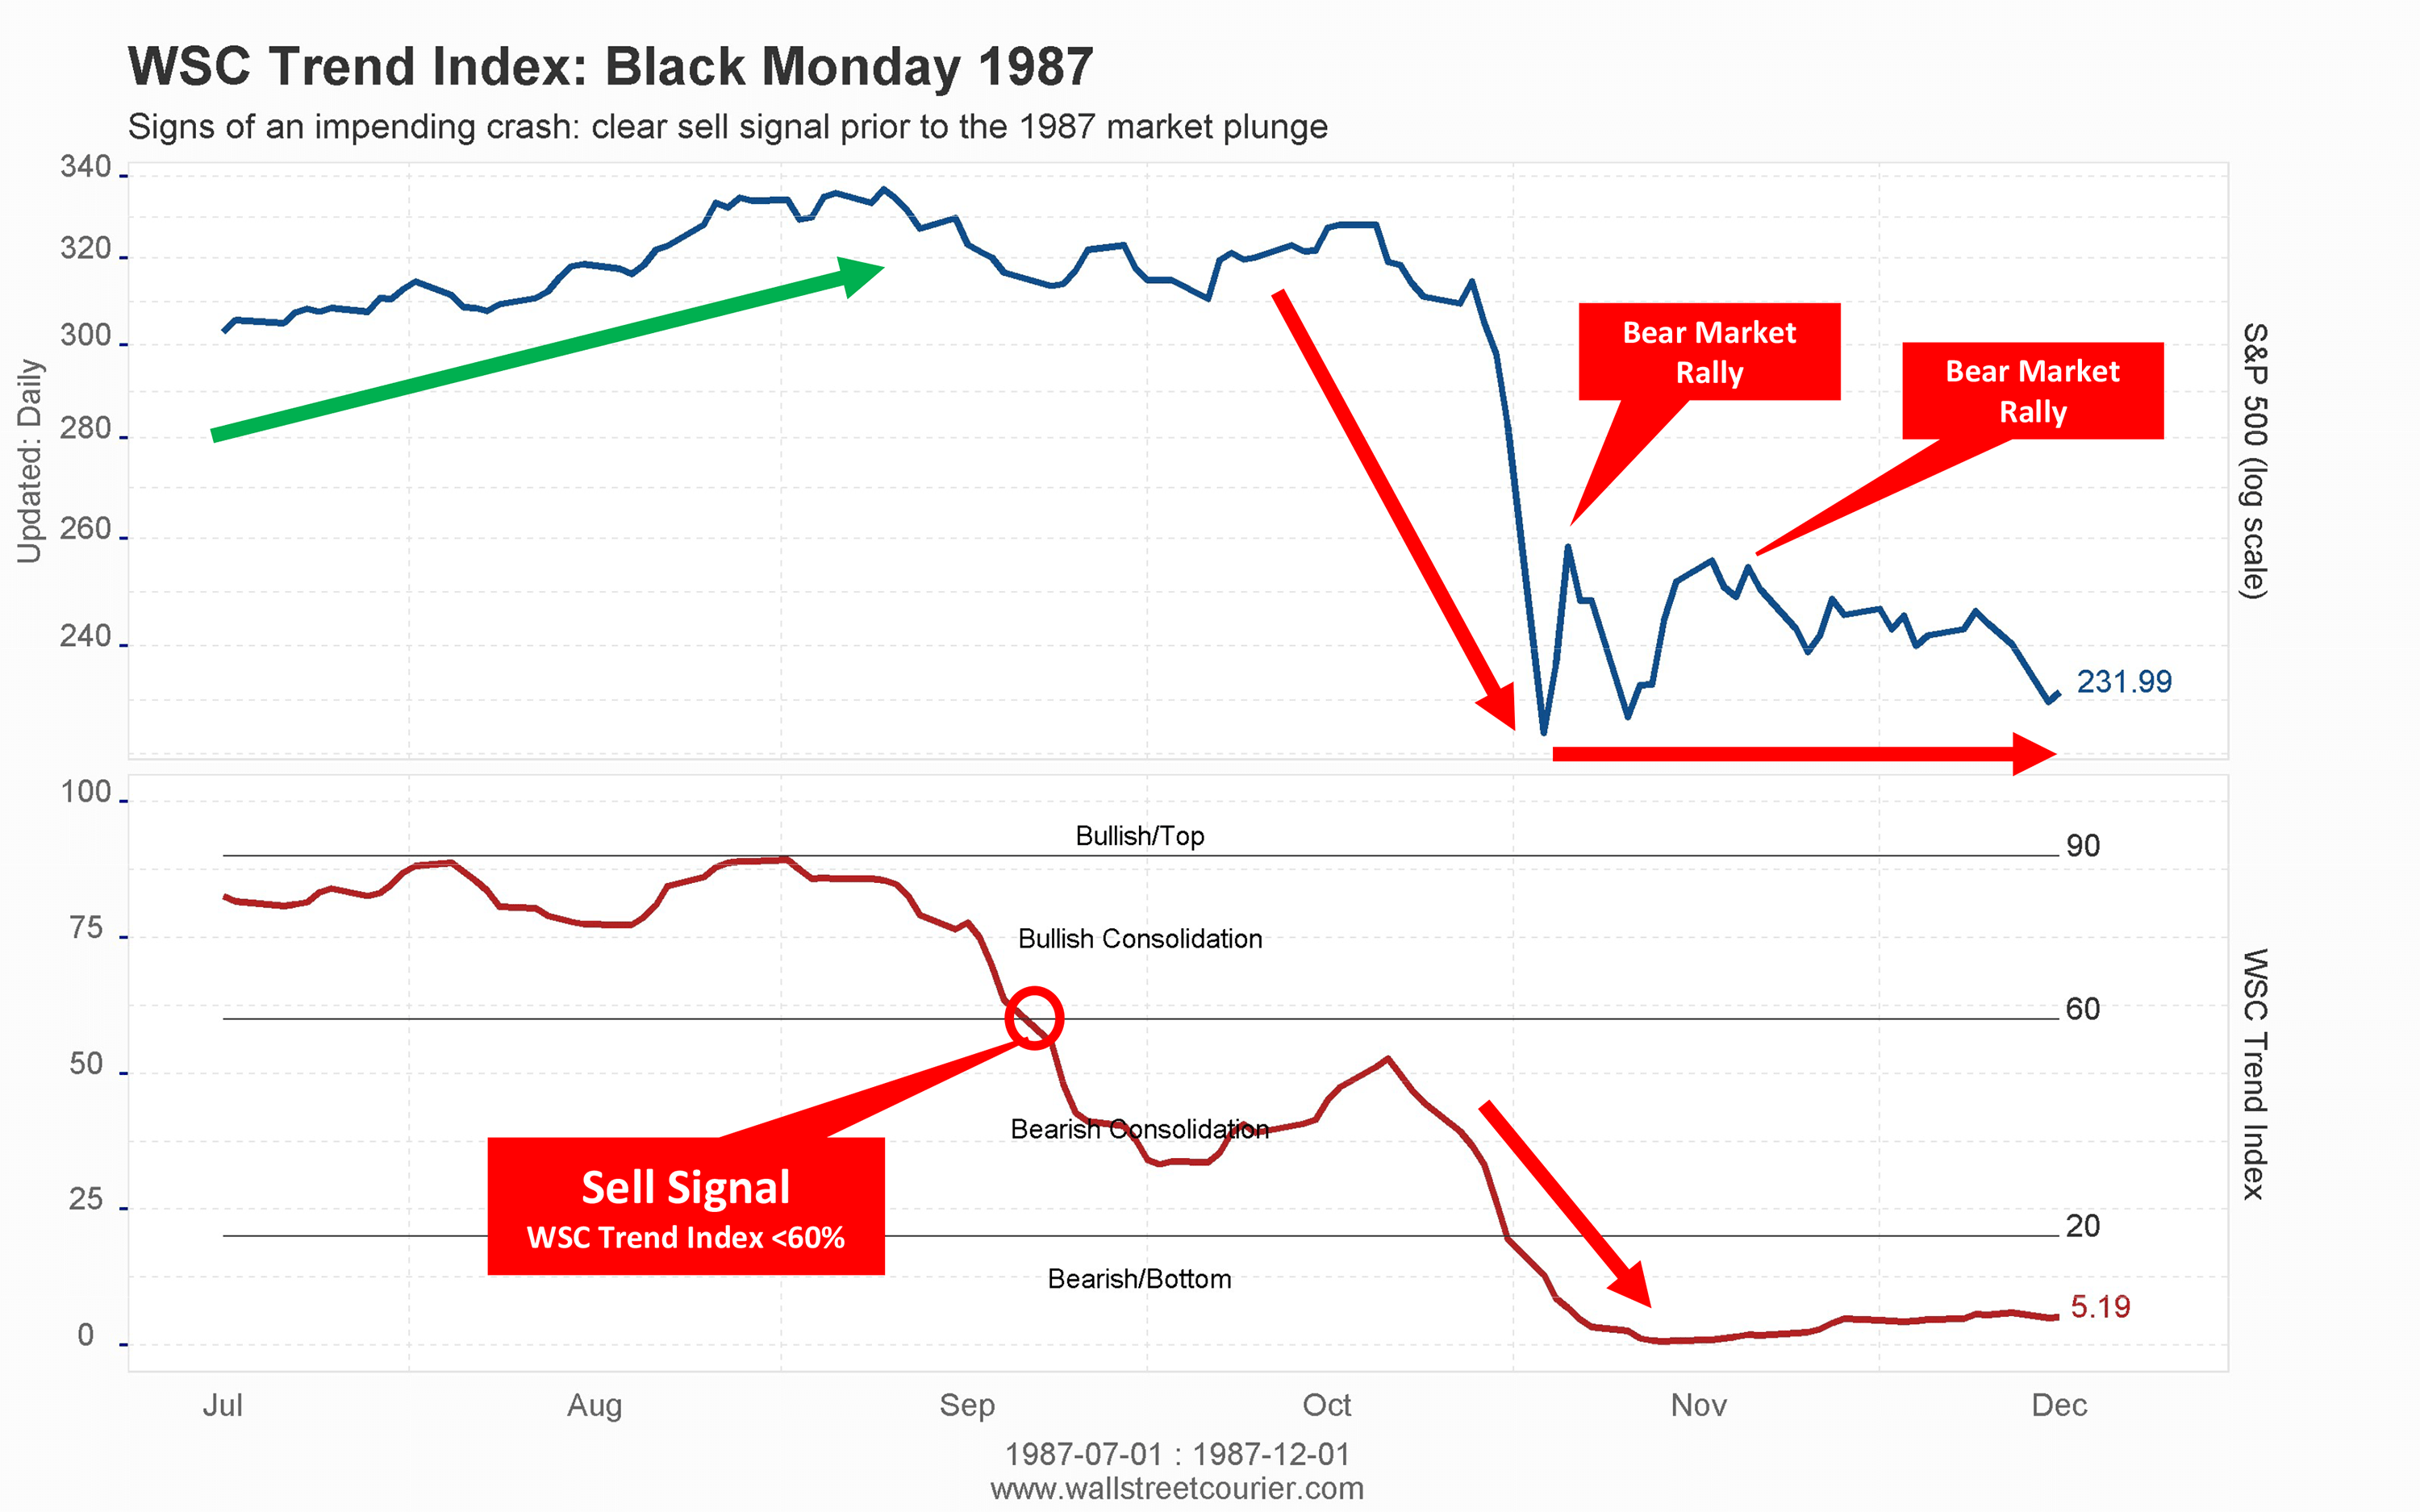 WSC Trend Index chart showing early sell signal before 1987 market crash